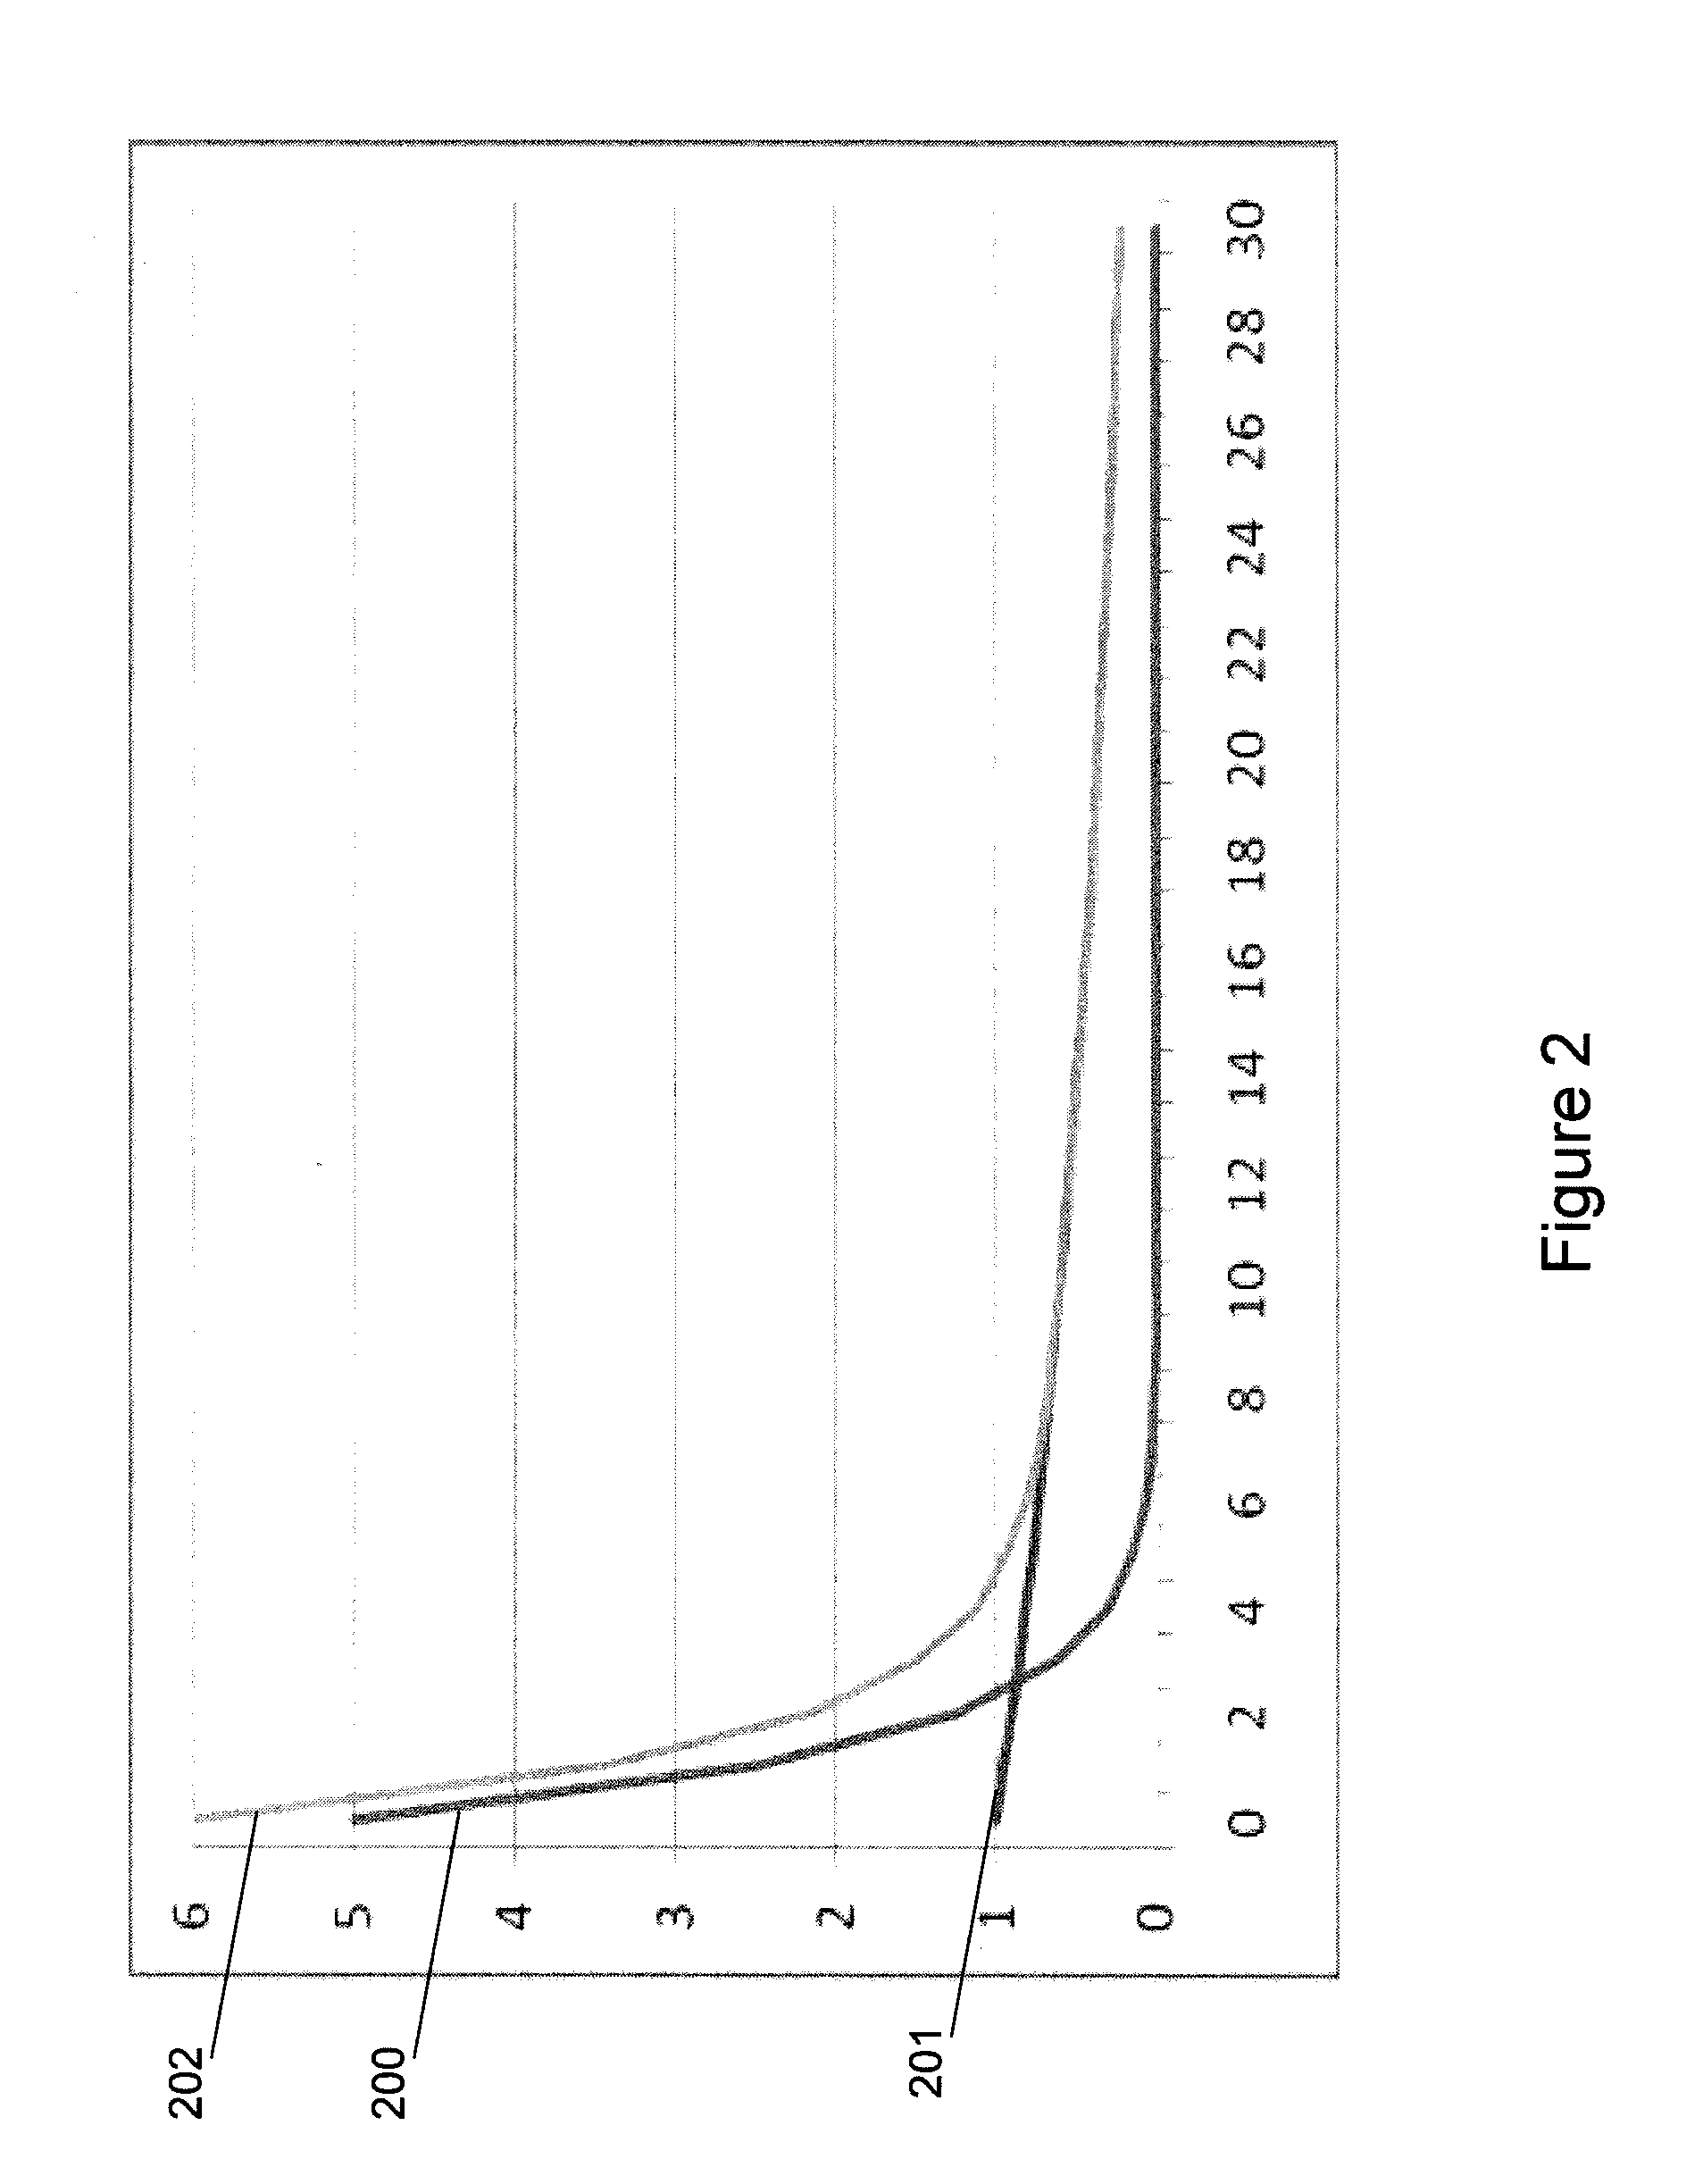 Method for recommending enterprise documents and directories based on access logs